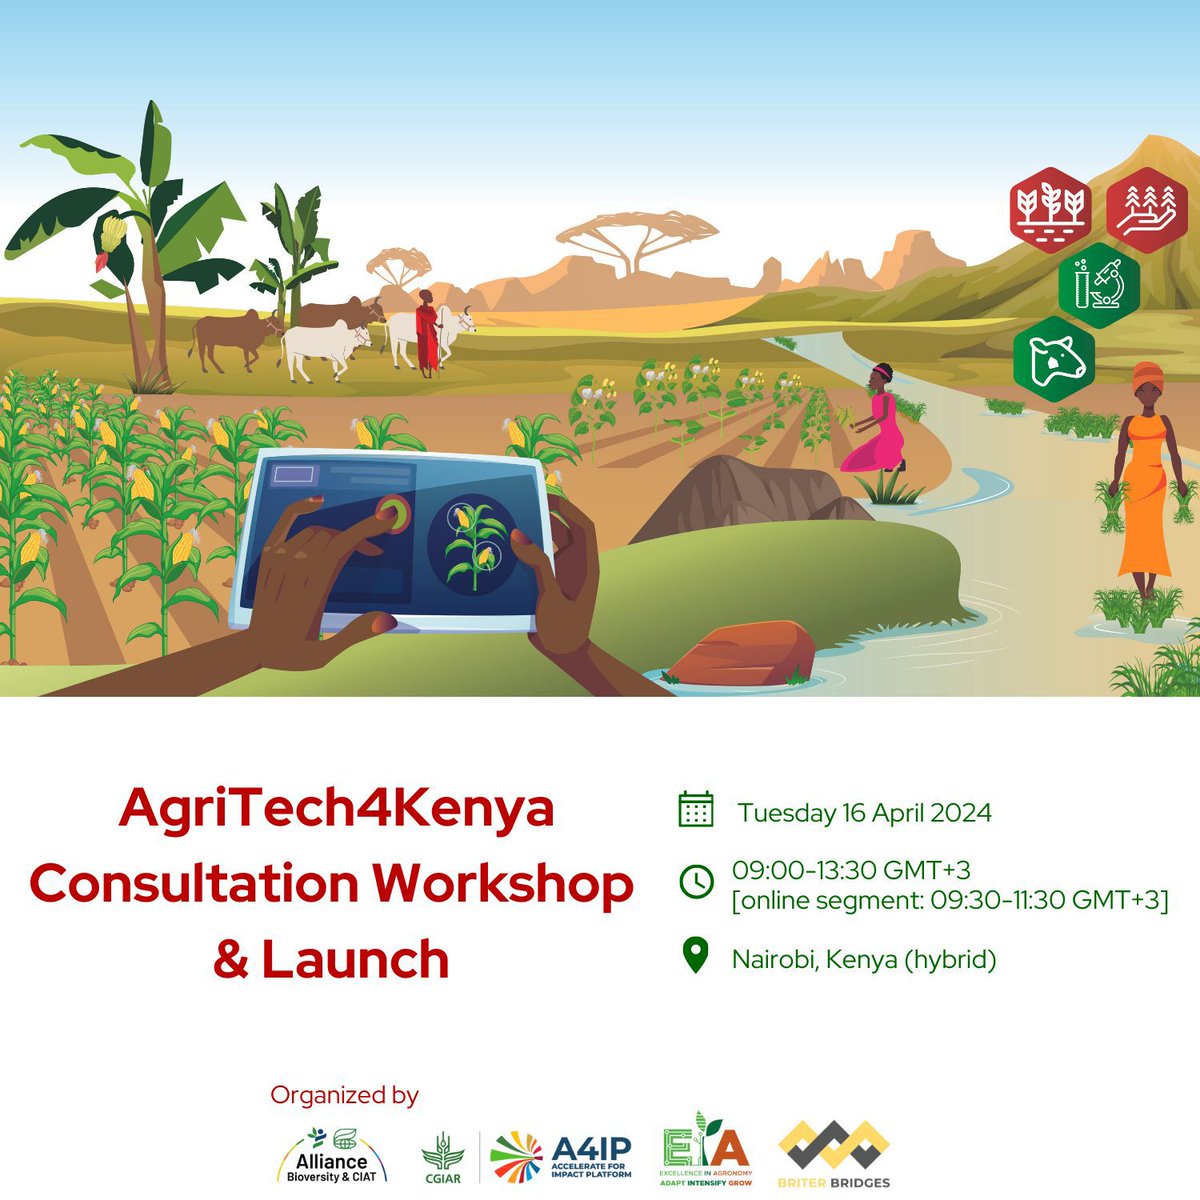 Food Systems | #AgriTech4Kenya Shaping the future of agriculture in Kenya! Nixon Gecheo's opening remarks at the AgriTech4Kenya Consultation Workshop & Launch today paved the way for meaningful dialogue on agri-food and climate-tech innovations. Embracing a participatory…